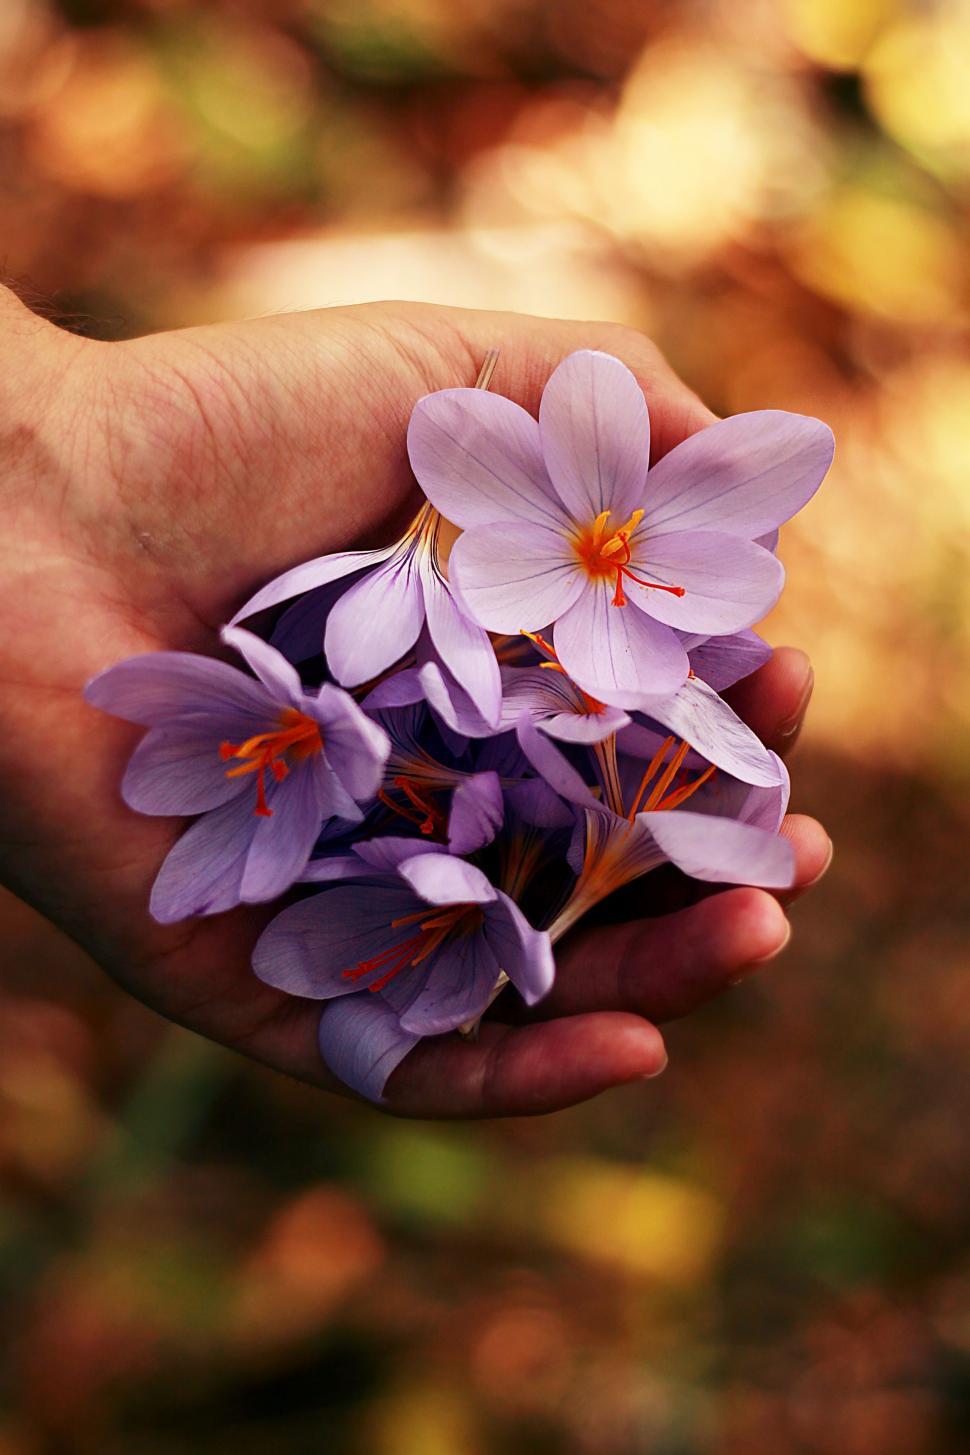 Free Image of Hand Holding Bunch of Purple Flowers 